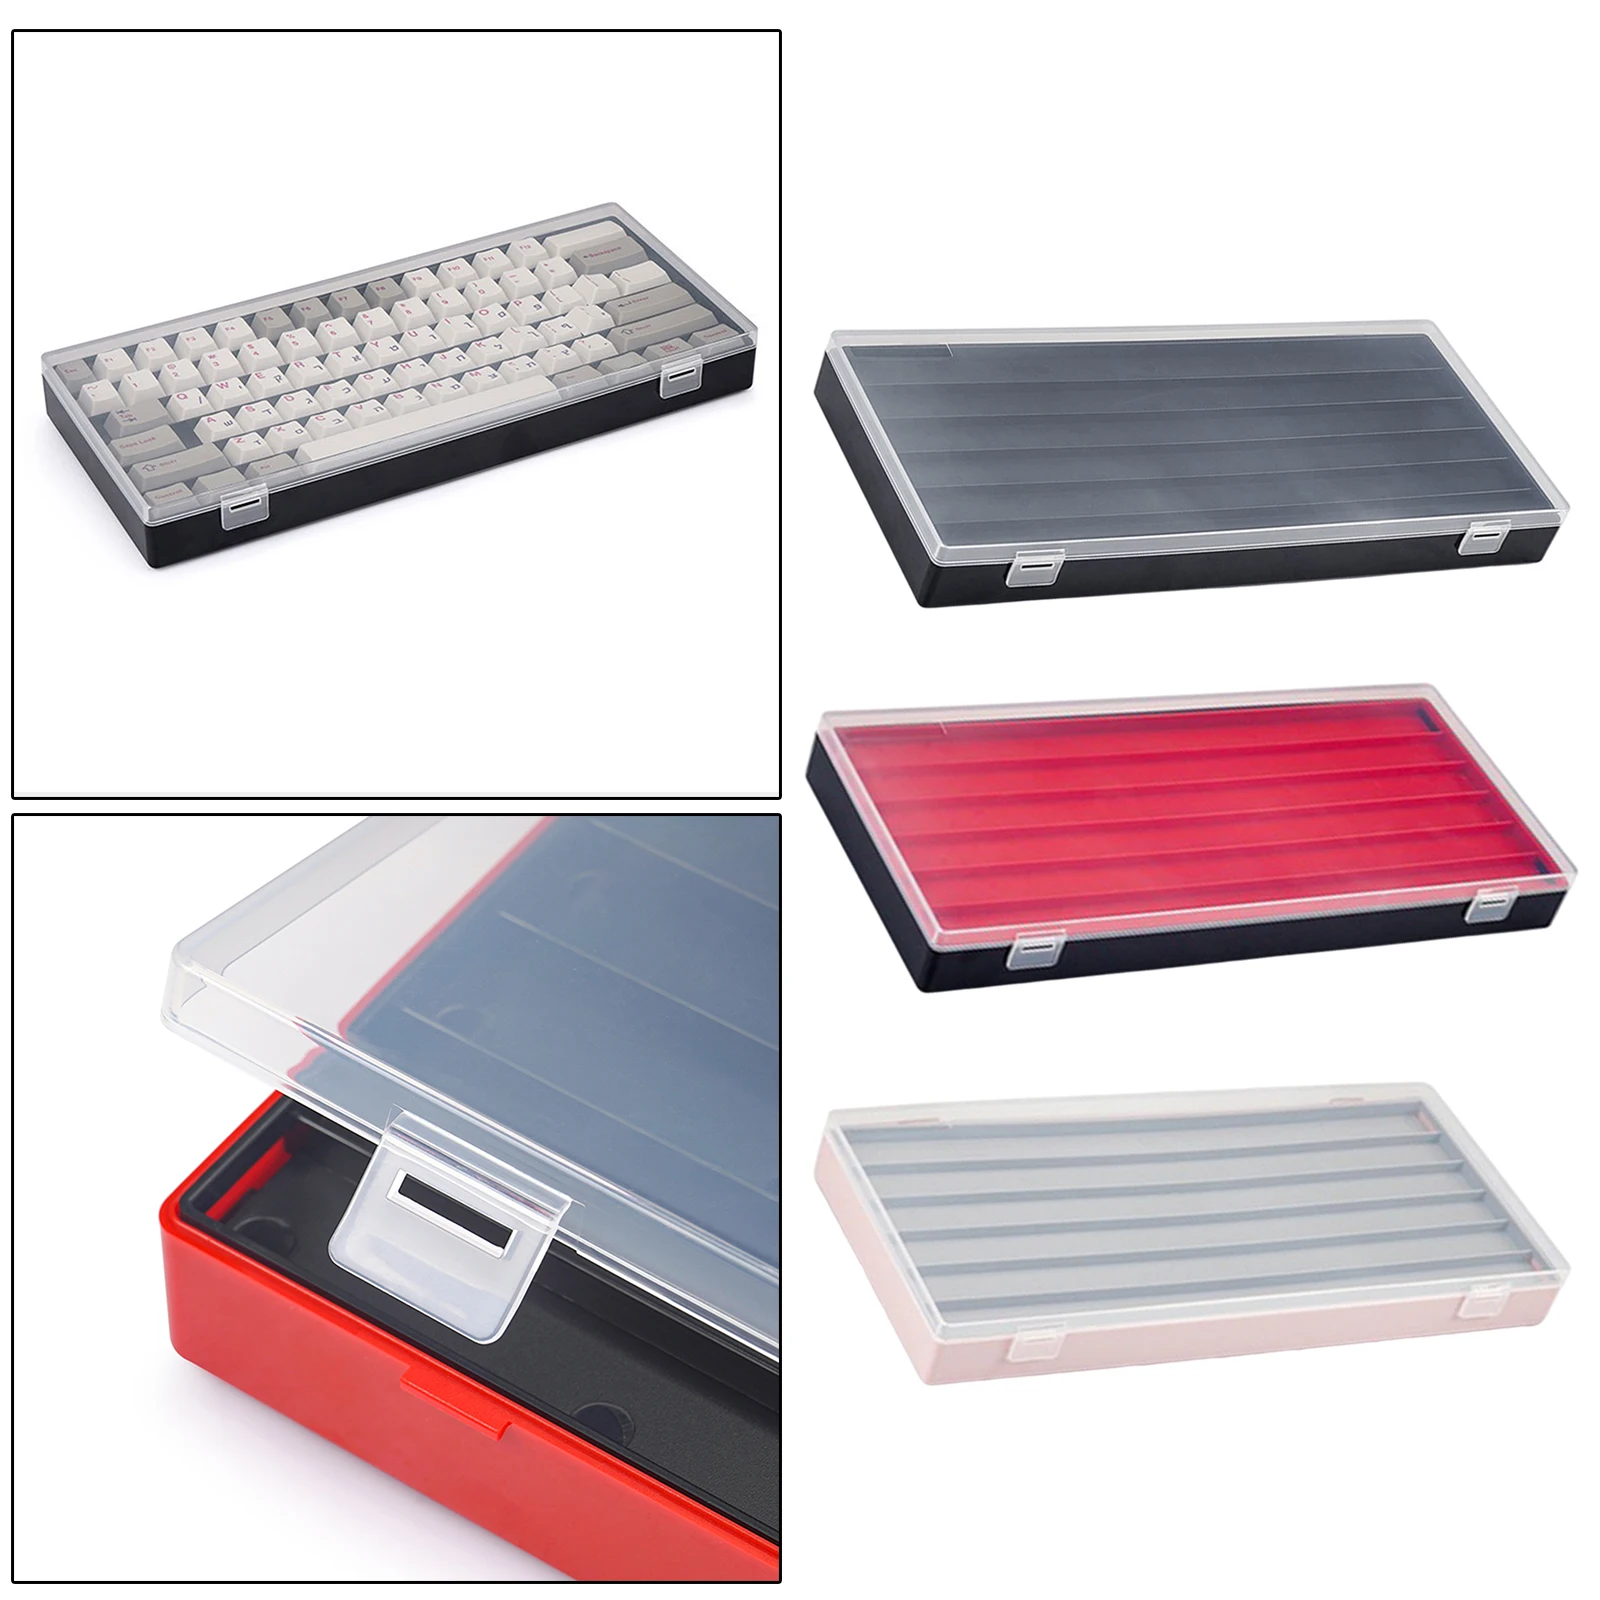 3 Layers ABS Plastic Keycaps Storage Box Dustproof Collection Containers